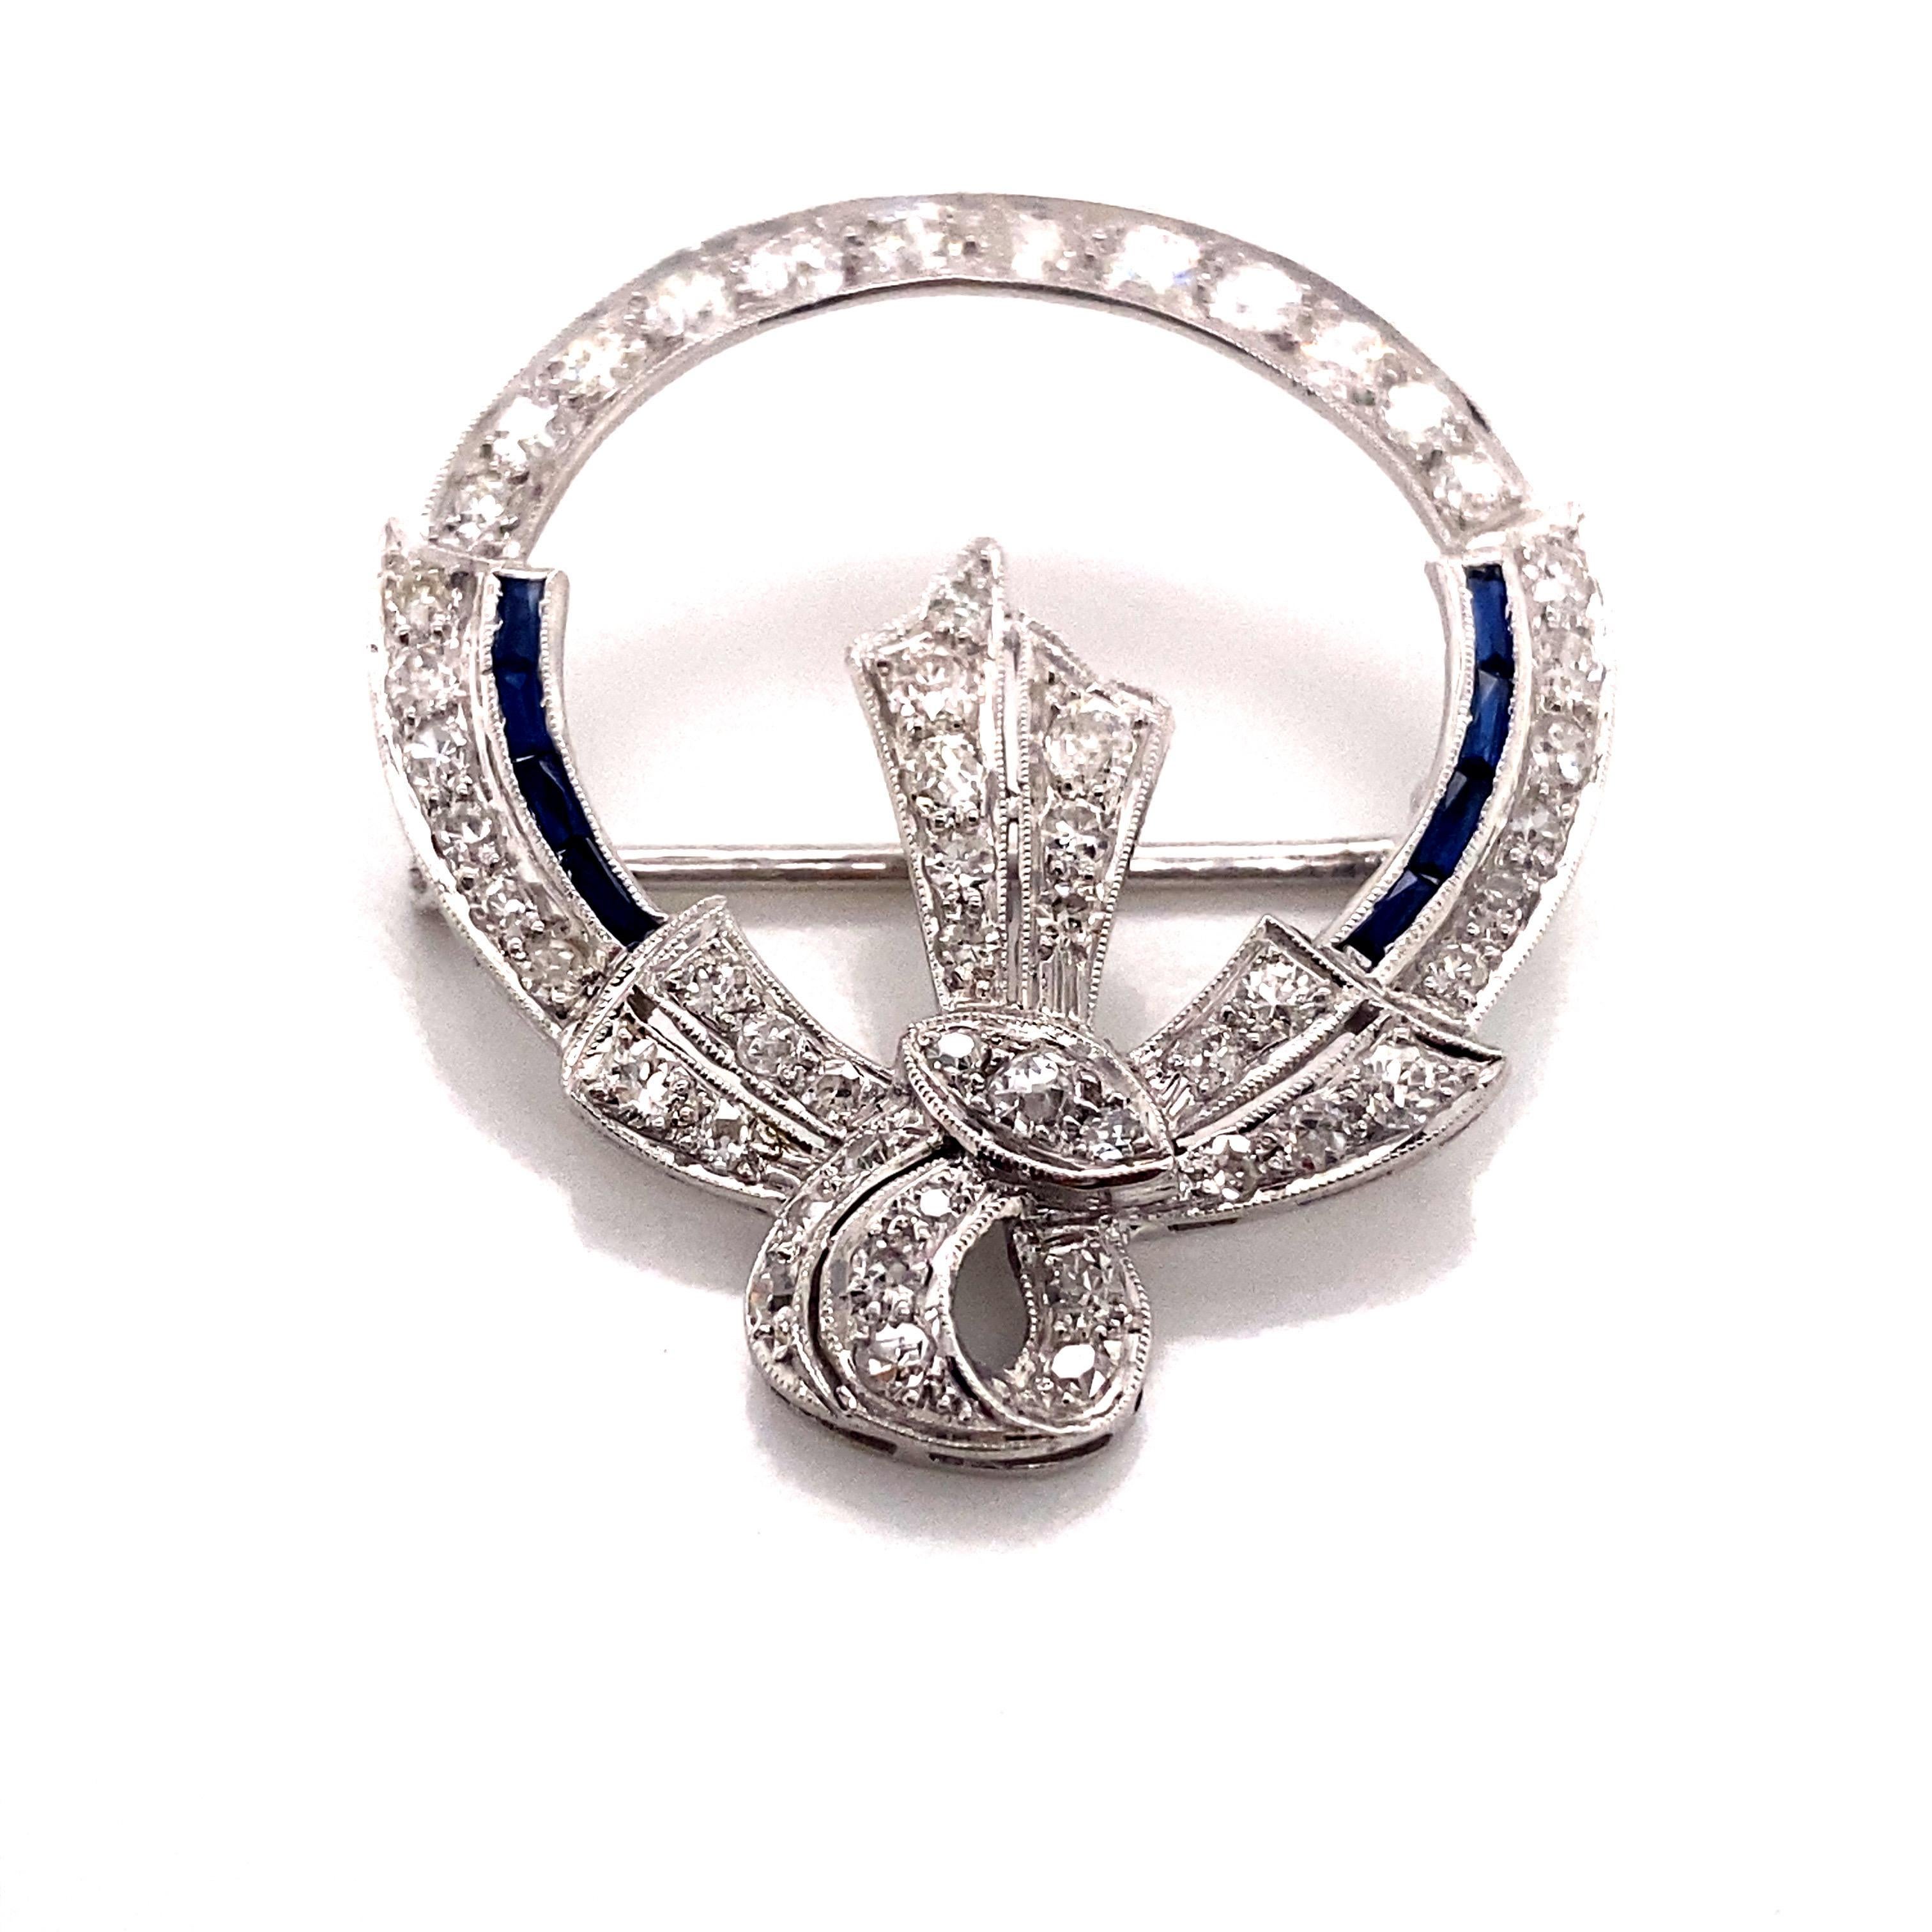 Vintage 1930’s White Gold Diamond and Sapphire Wreath Pin - The wreath contains 53 Old European and single cut diamonds that weigh approximately 1.50ct total weight. The diamond quality is H - I color, and VS1 - I1 clarity. The diamonds are hand set